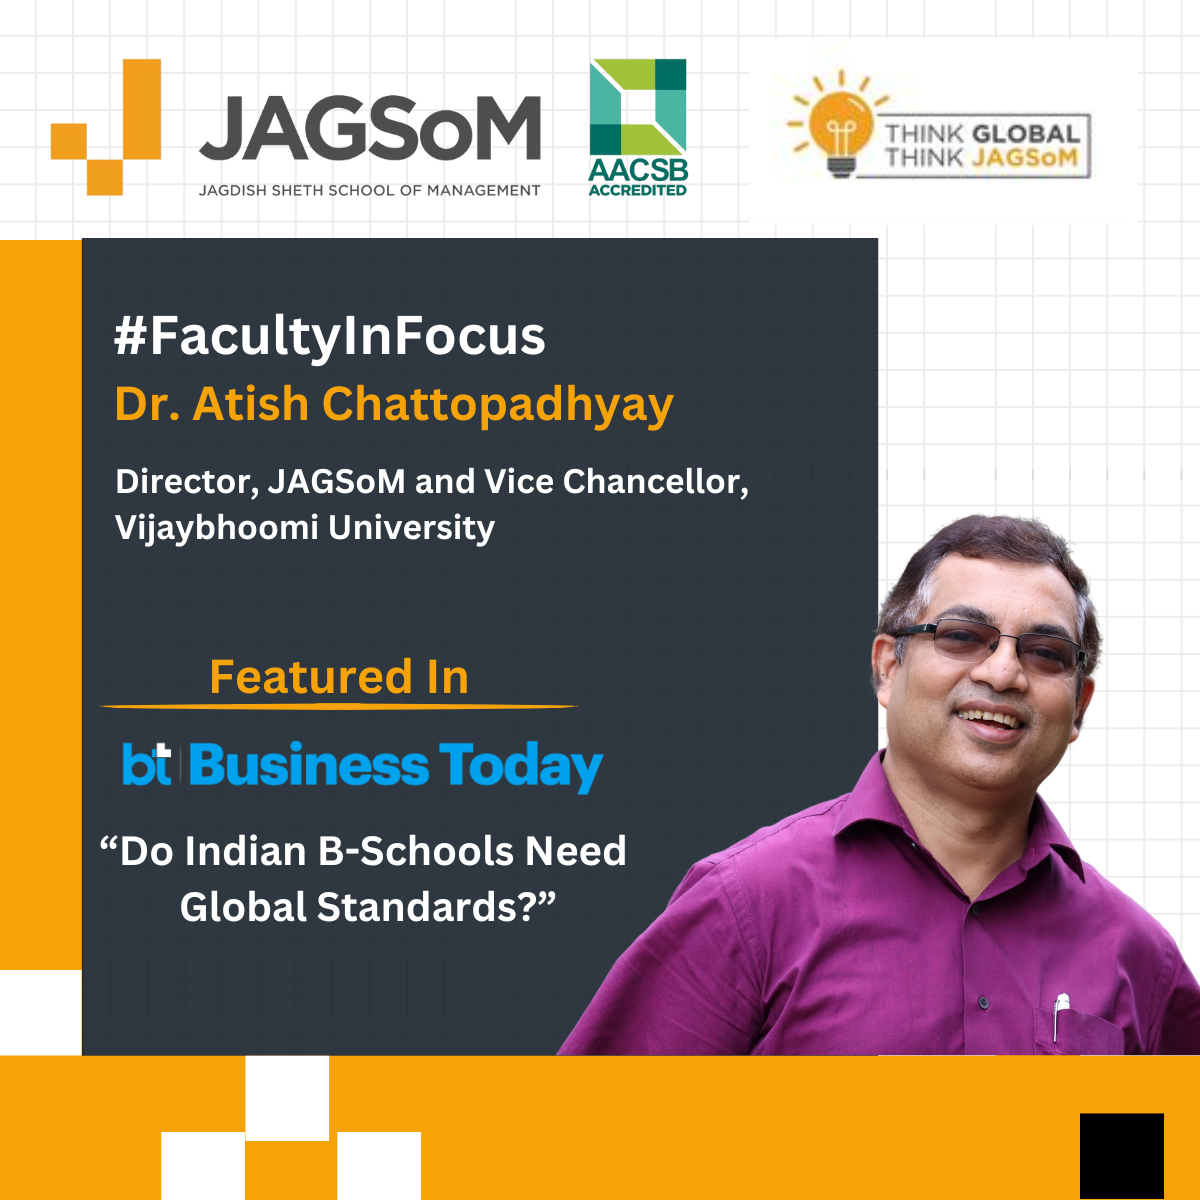 Faculty in Focus- Dr. Atish Chattopadhyay